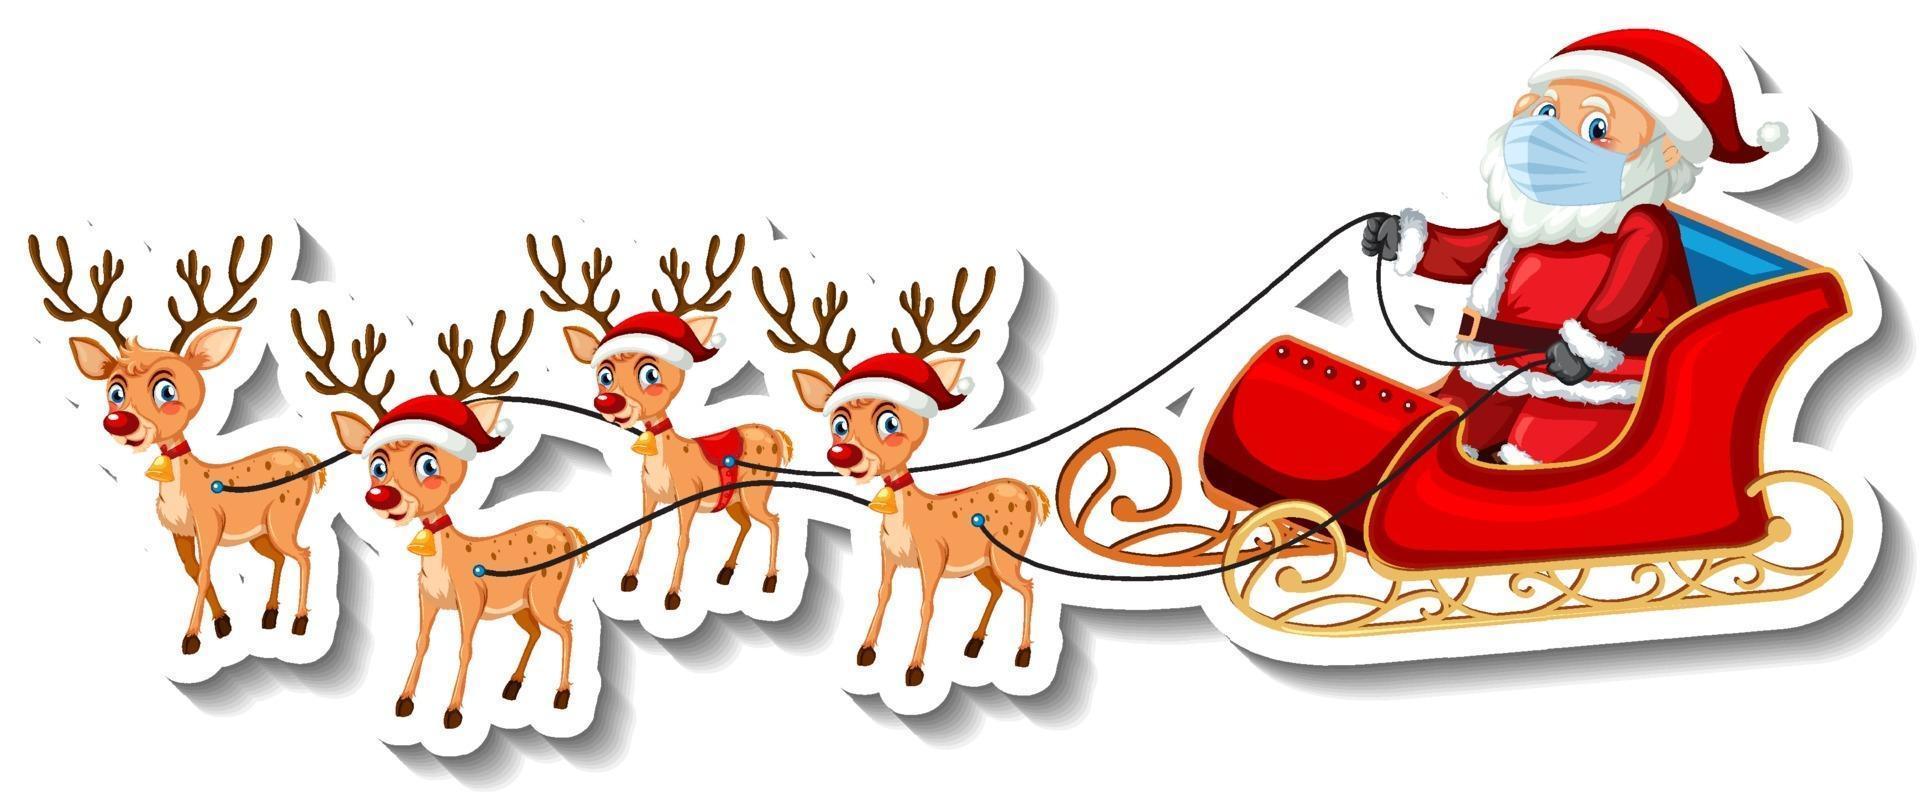 a-sticker-template-with-santa-claus-on-sleigh-and-reindeers-3223036